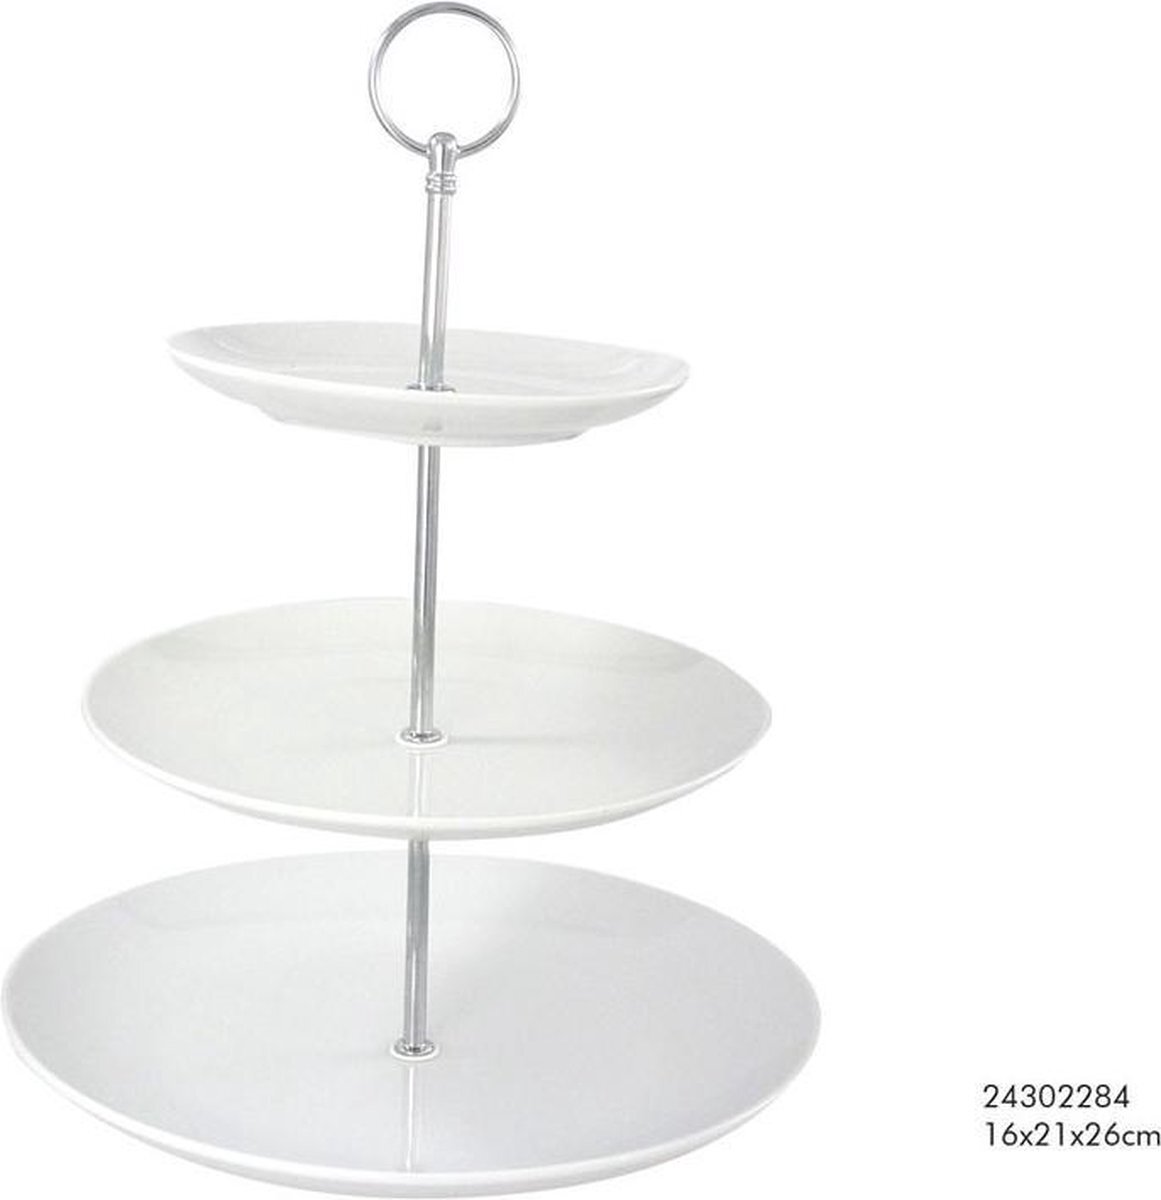 - Etagere 3 laags rond 16x21x26c